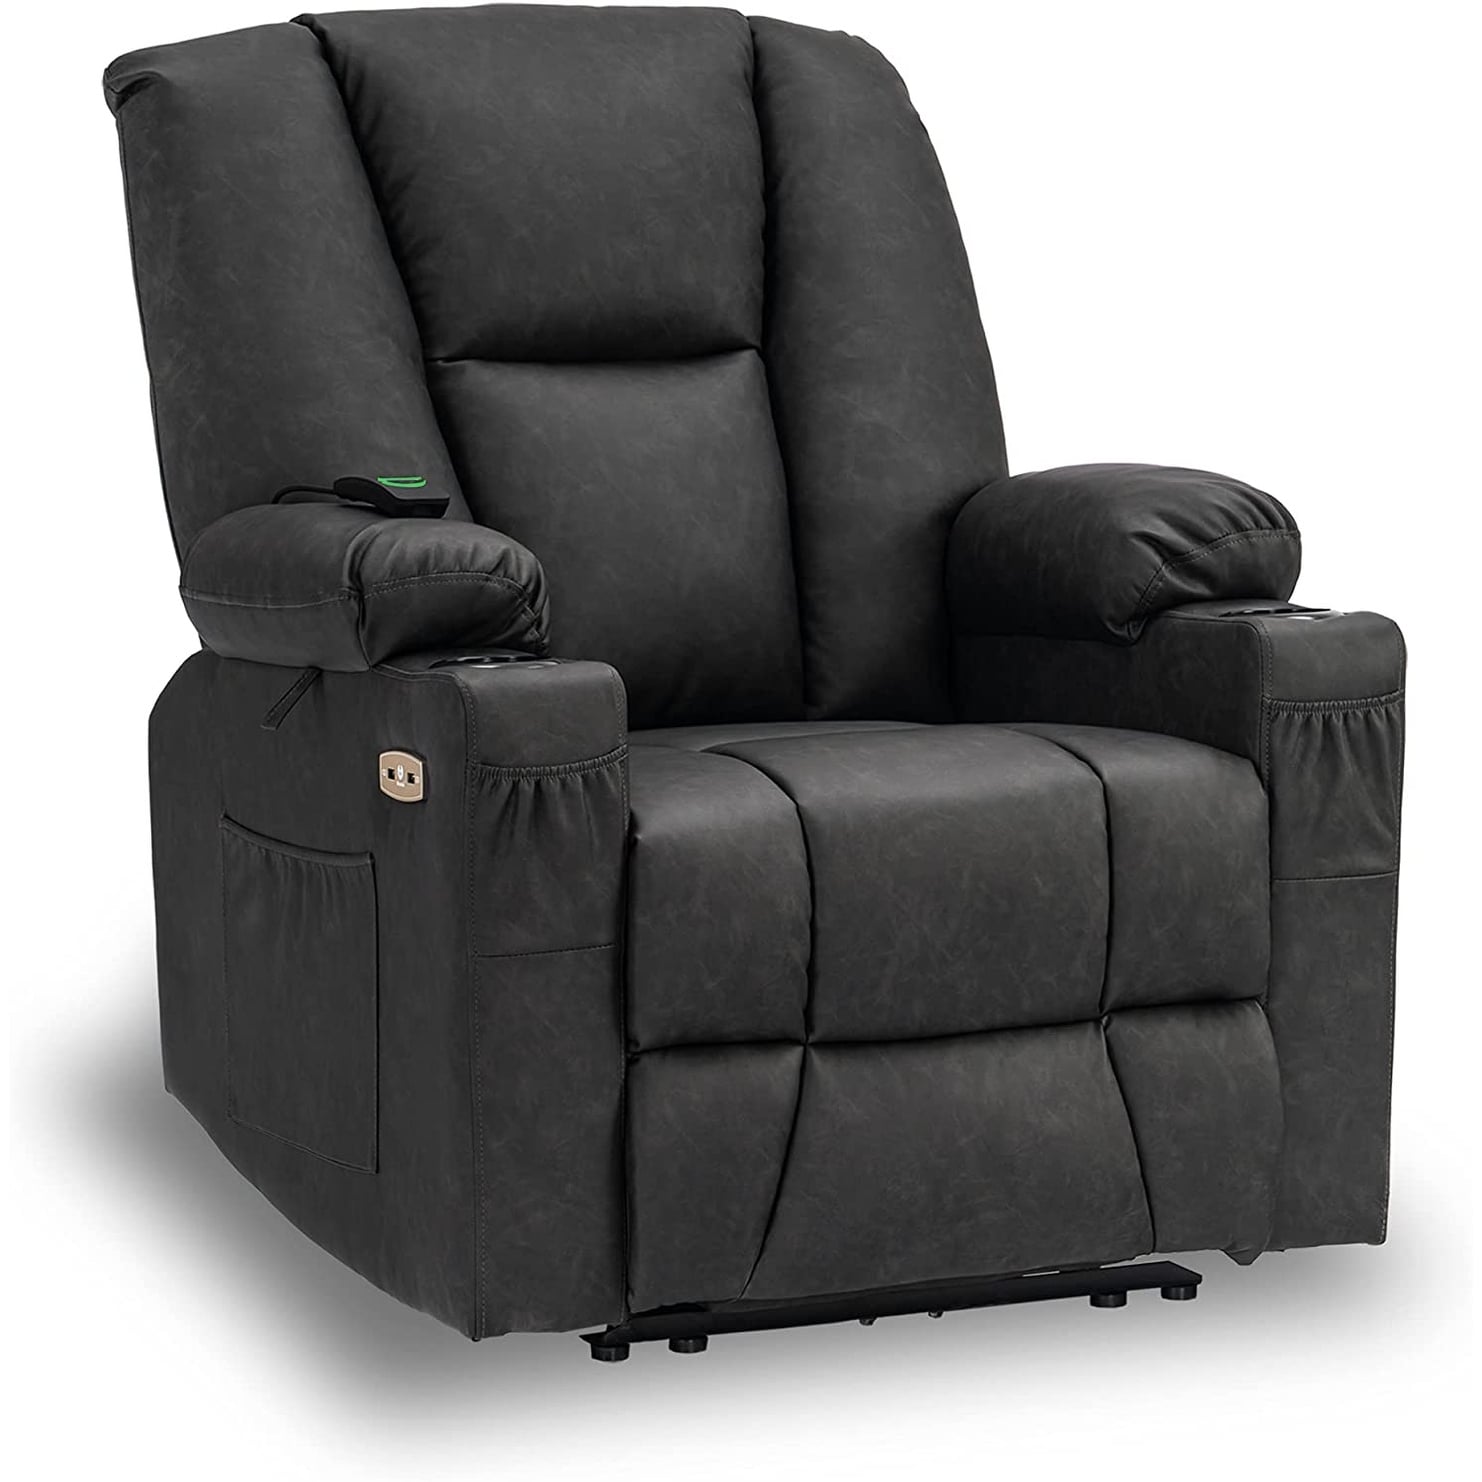 https://ak1.ostkcdn.com/images/products/is/images/direct/941451873b9e3507b538aad72af1da2785ef3841/Mcombo-Electric-Power%C2%A0Recliner-with-Massage-%26-Heat%2C-Extended-Footrest%2C-2-USB-Ports%2C-Side-Pockets%2C-Cup-Holders%2C-Faux-Leather-8015.jpg